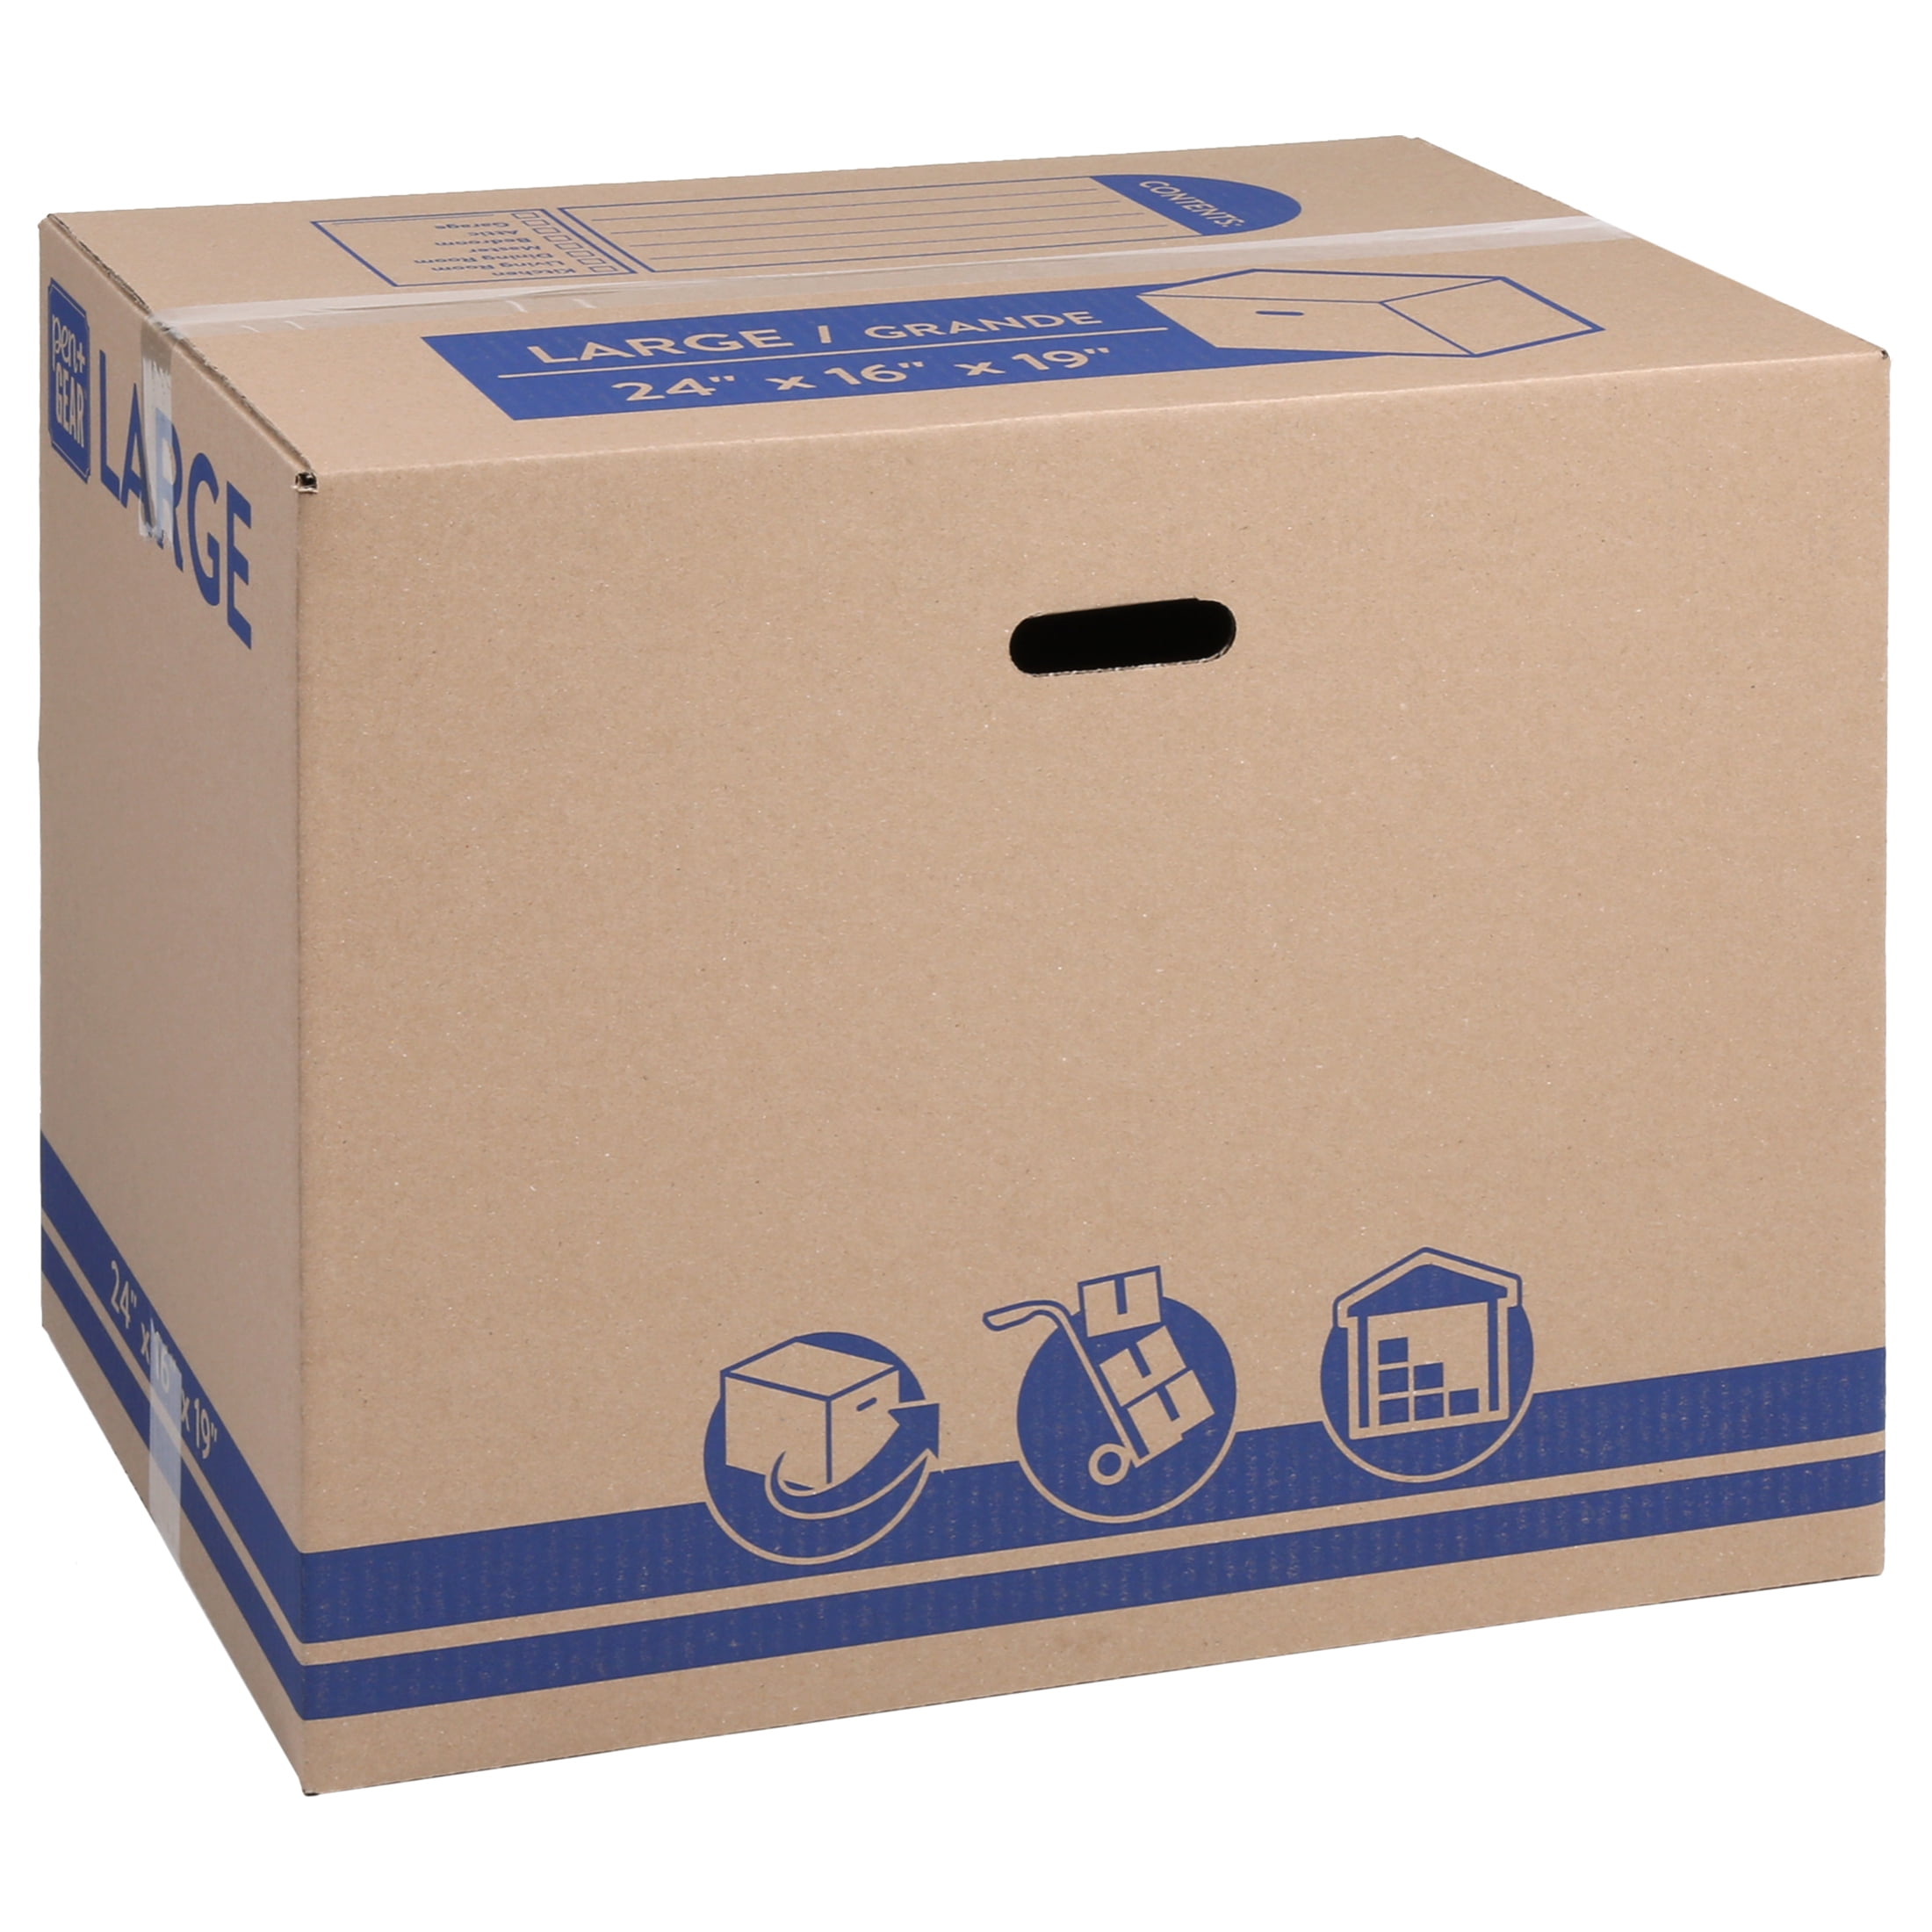 Pack/10 Light Weight White Self-Folding Kraft Boxes SZ Inches 8.5 x 2.75 x 2.75